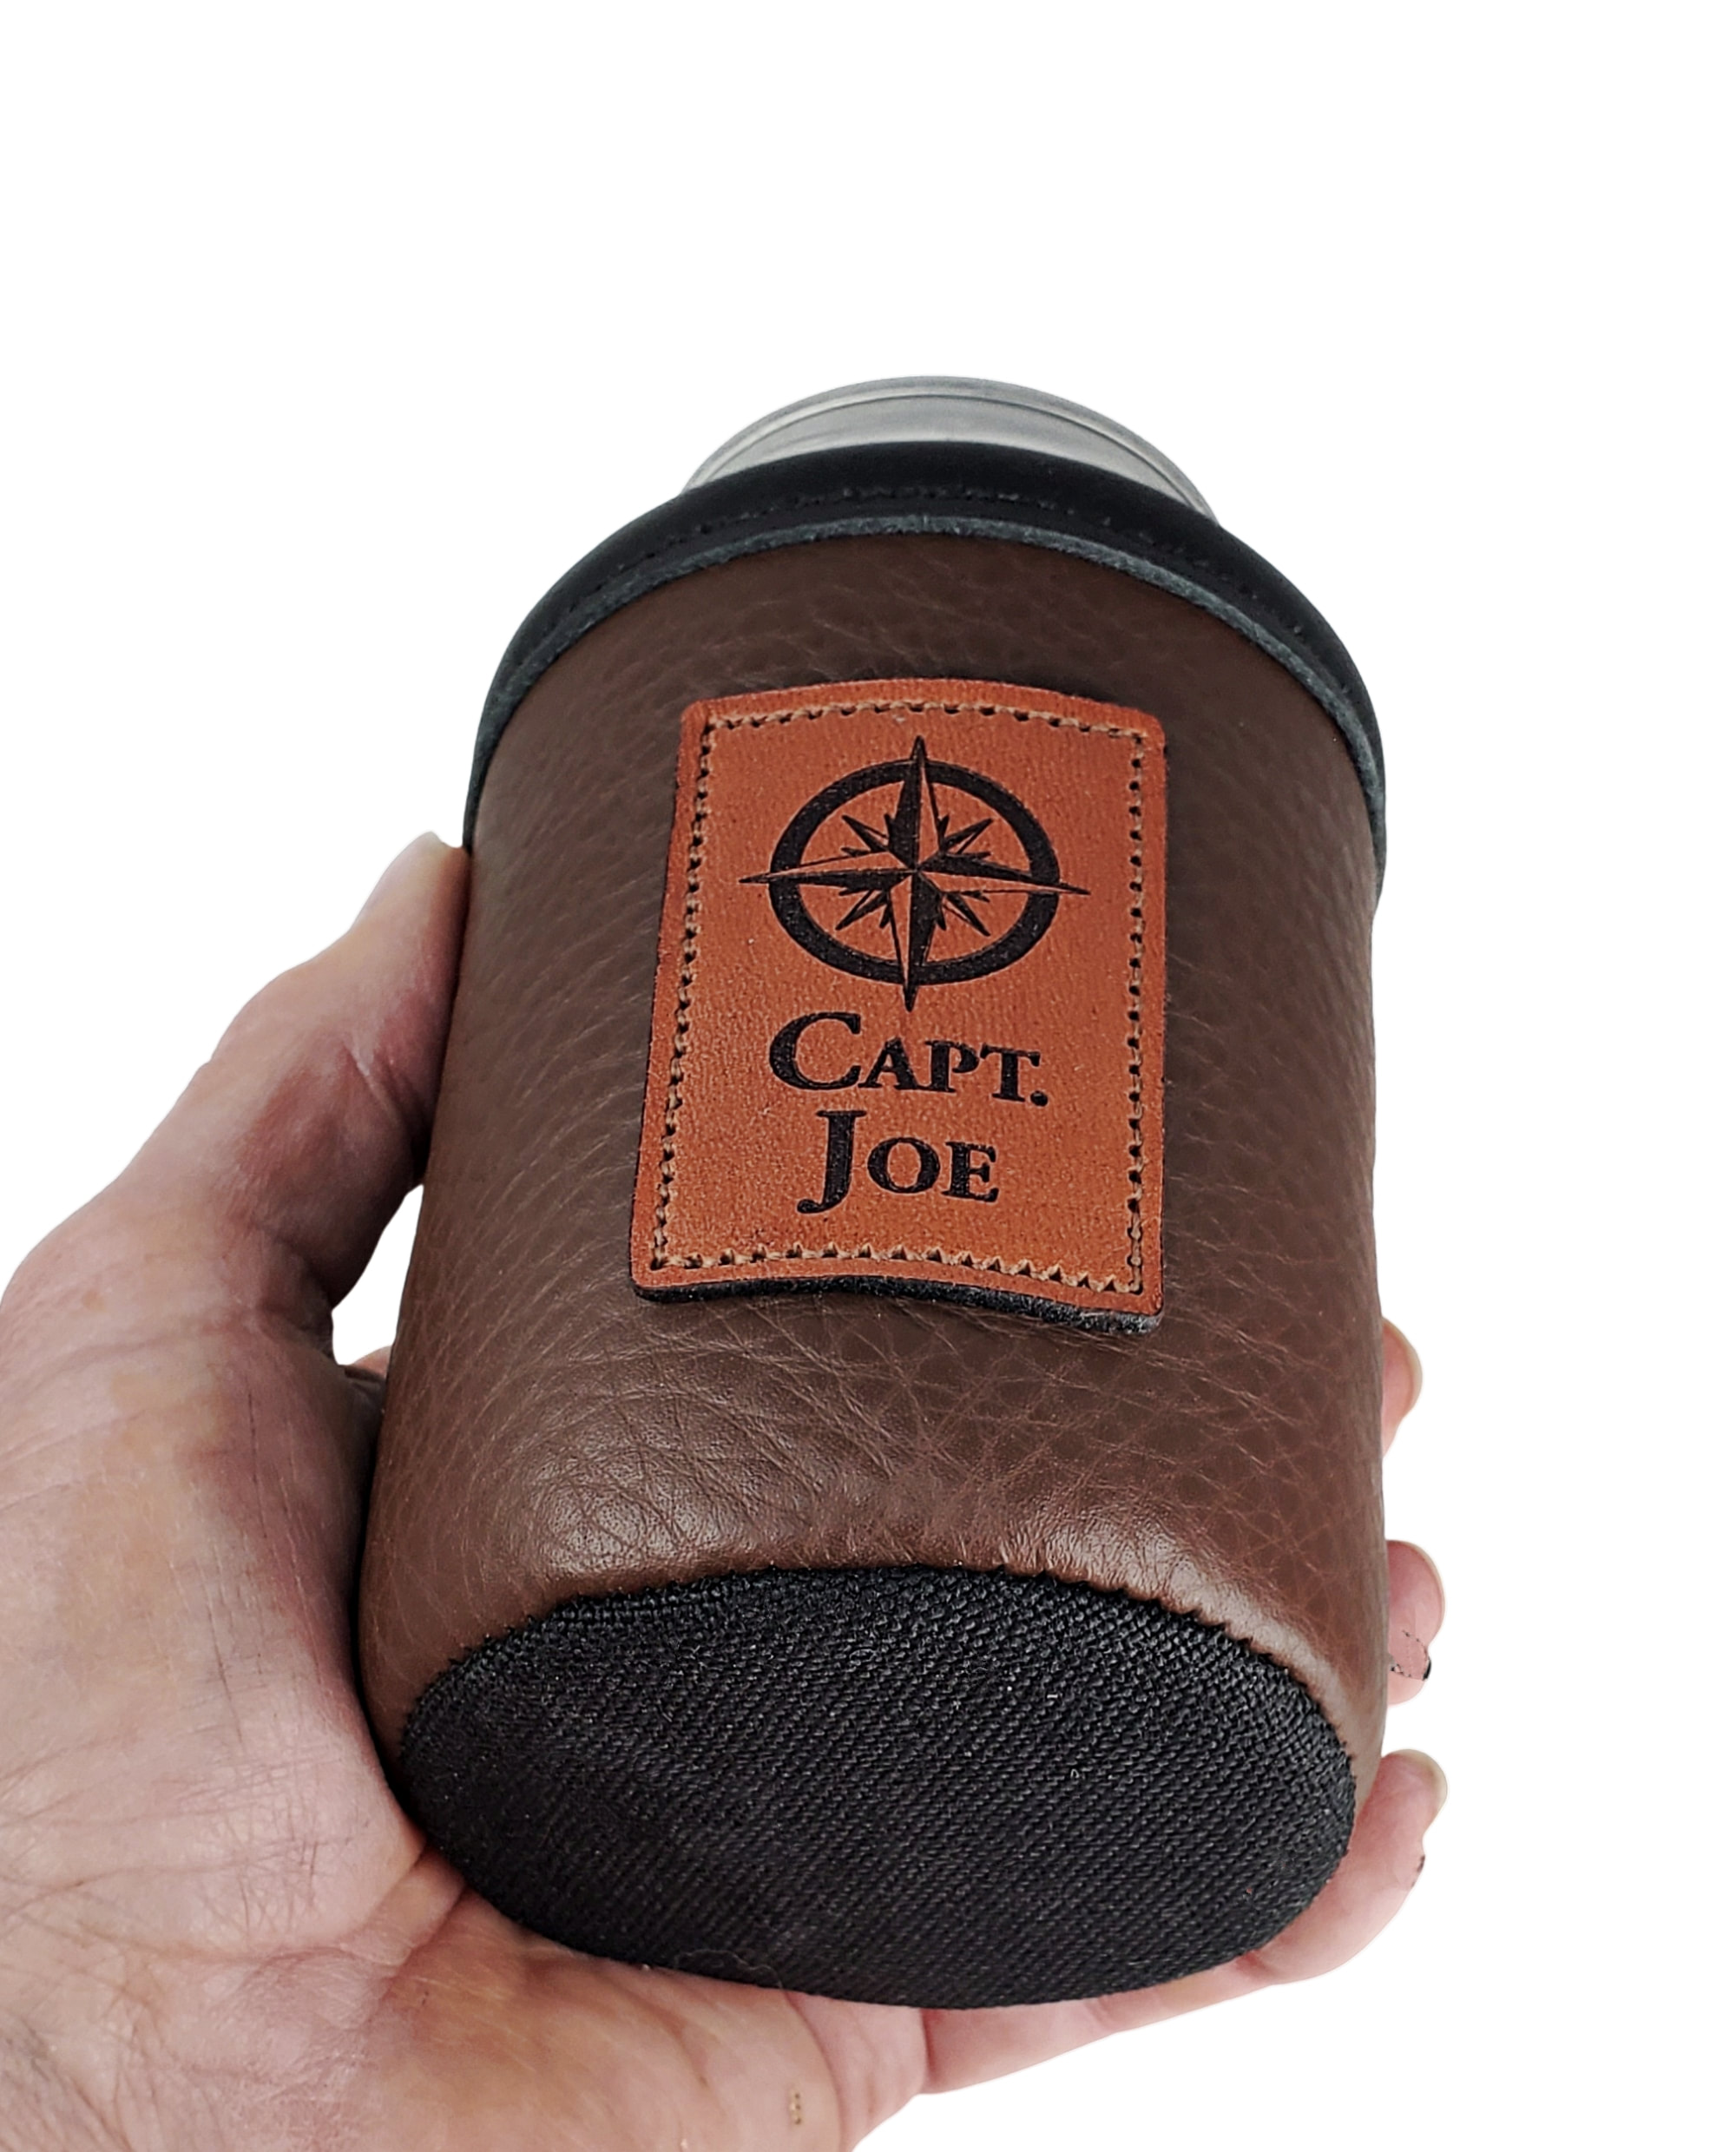 Personalized Leather Can Holder